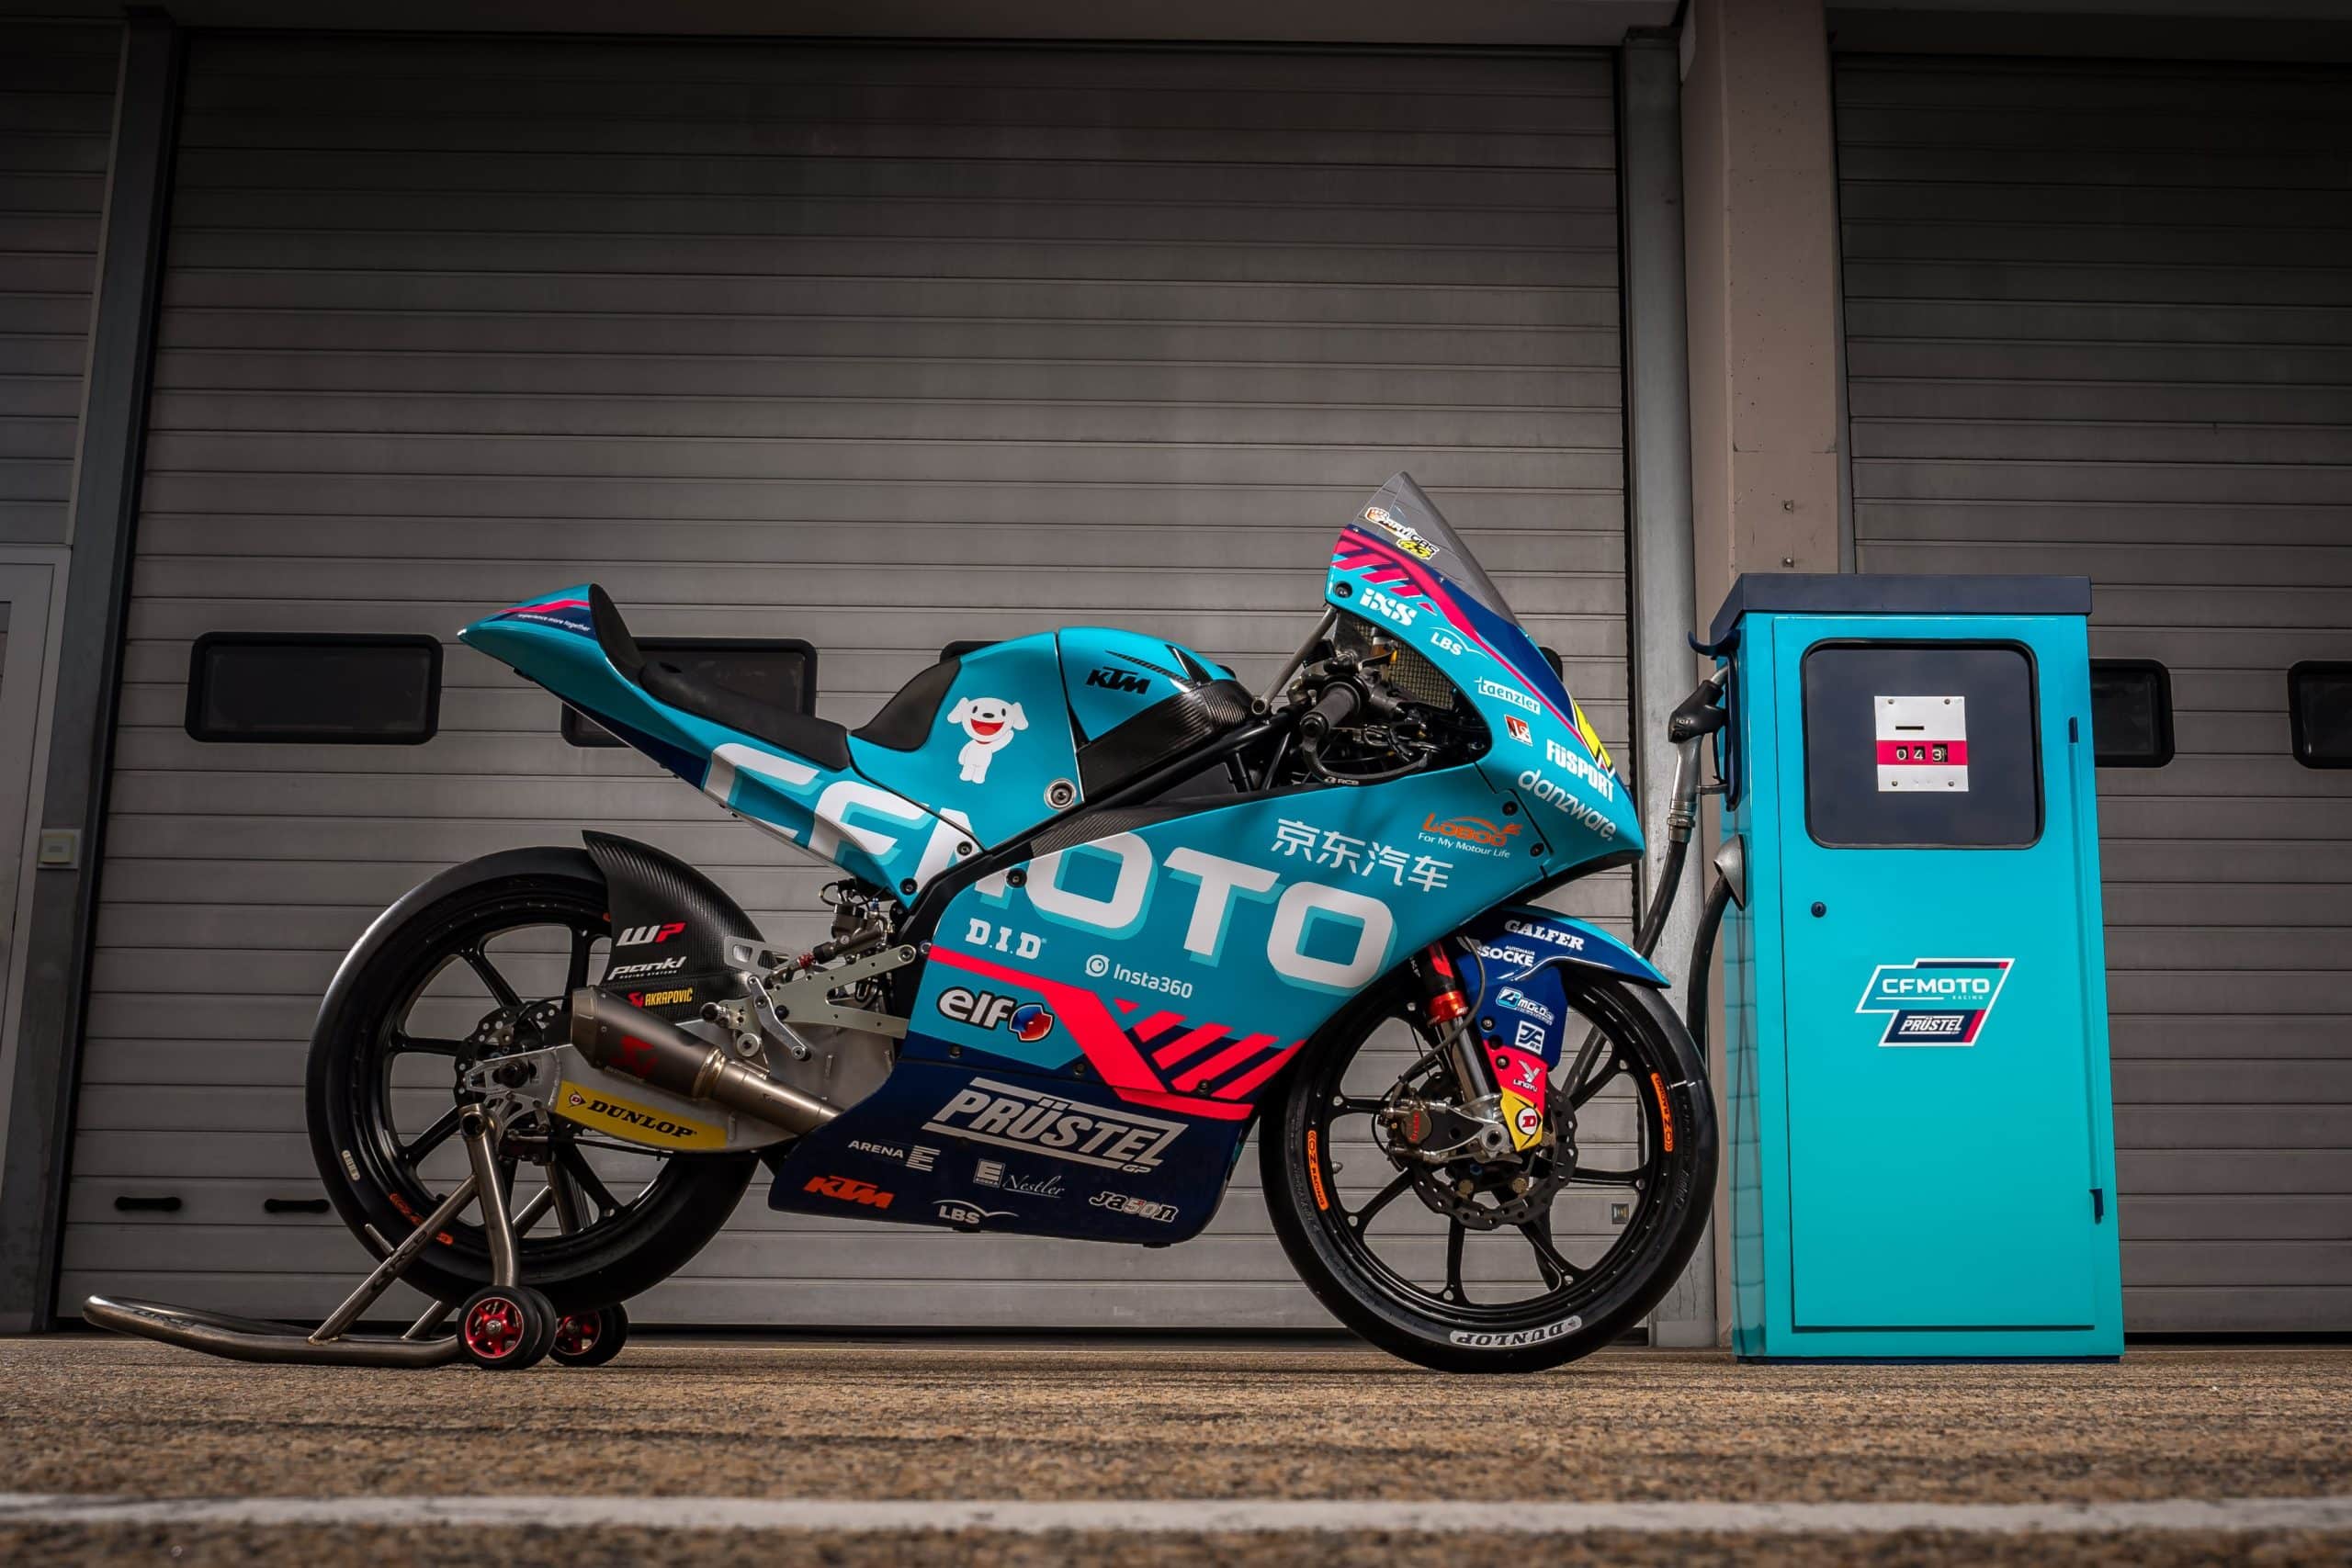 JD Auto to Make Moto3 Debut with CFMOTO